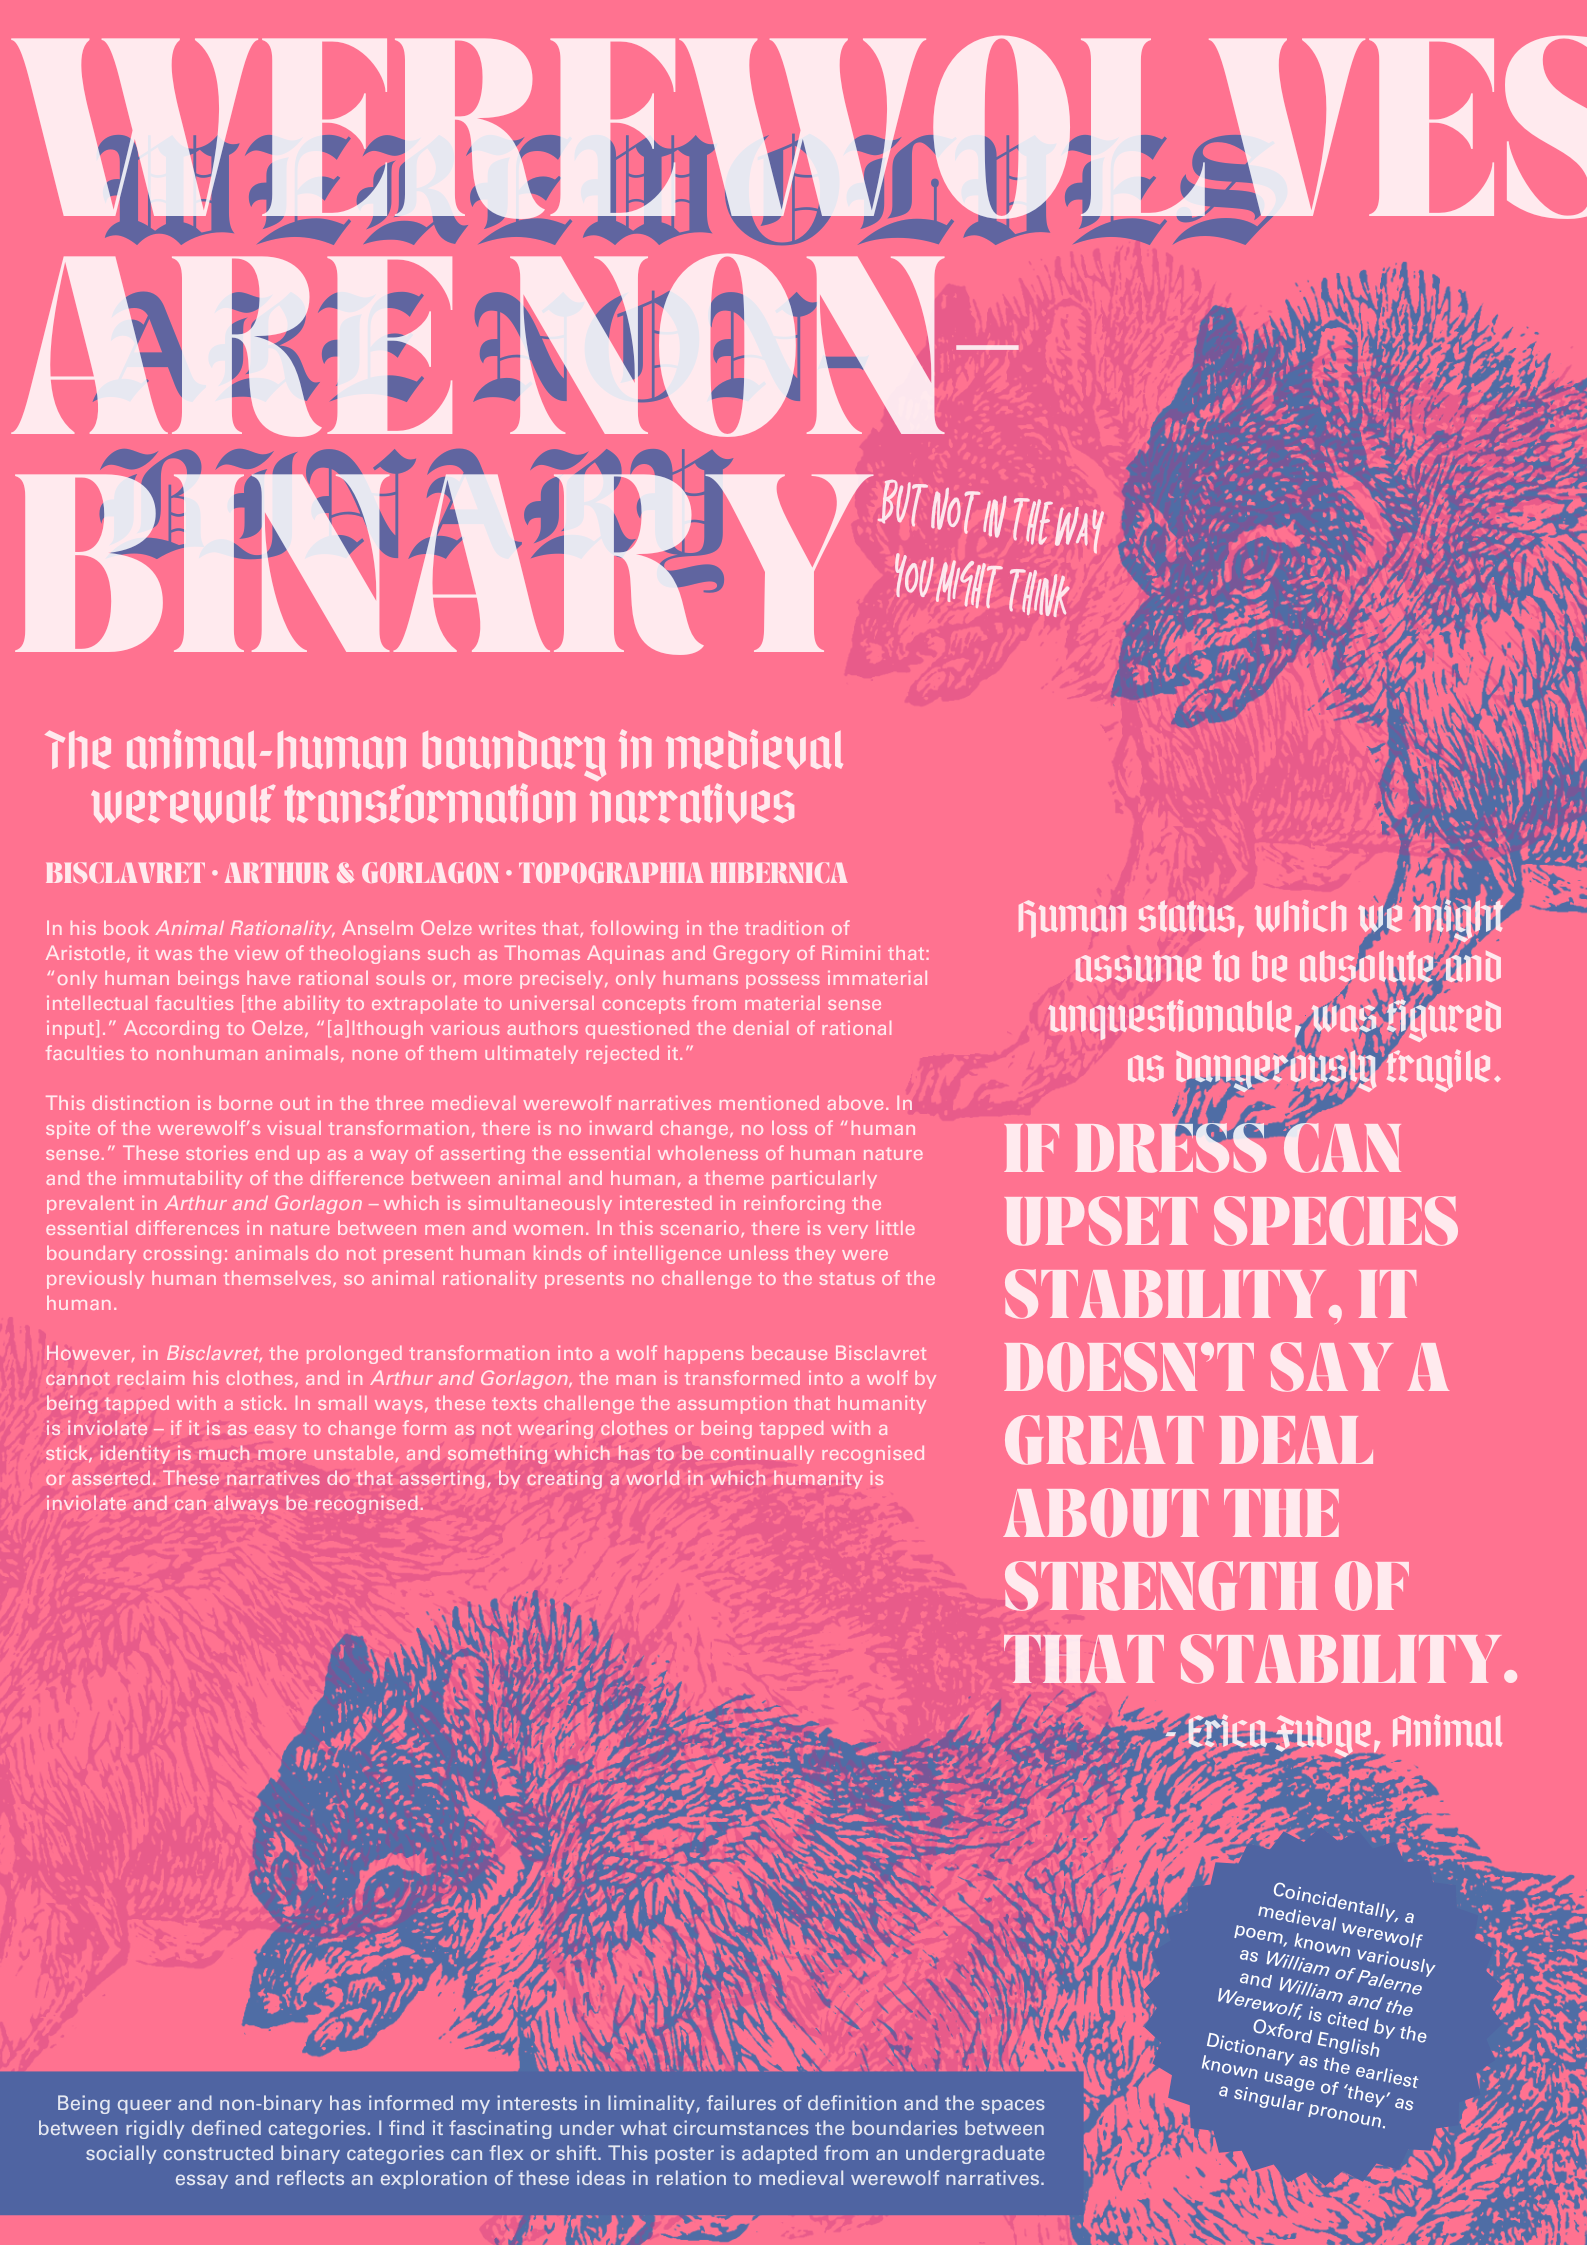 Werewolves are non-binary poster